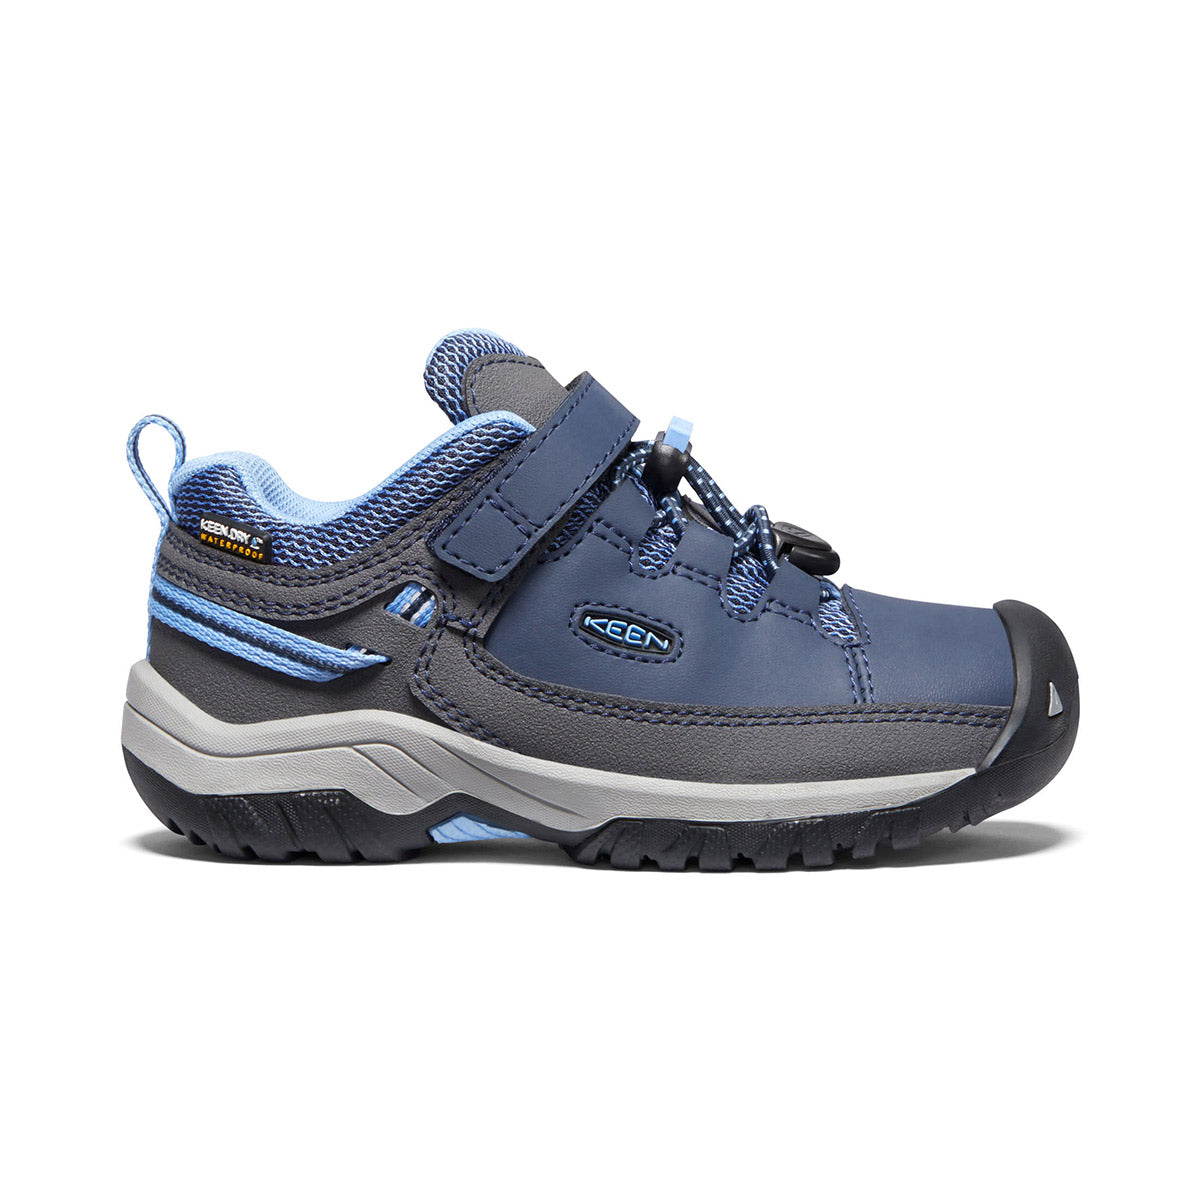 A child&#39;s blue and gray waterproof leather Keen Targhee Low kid&#39;s shoe against a white background.